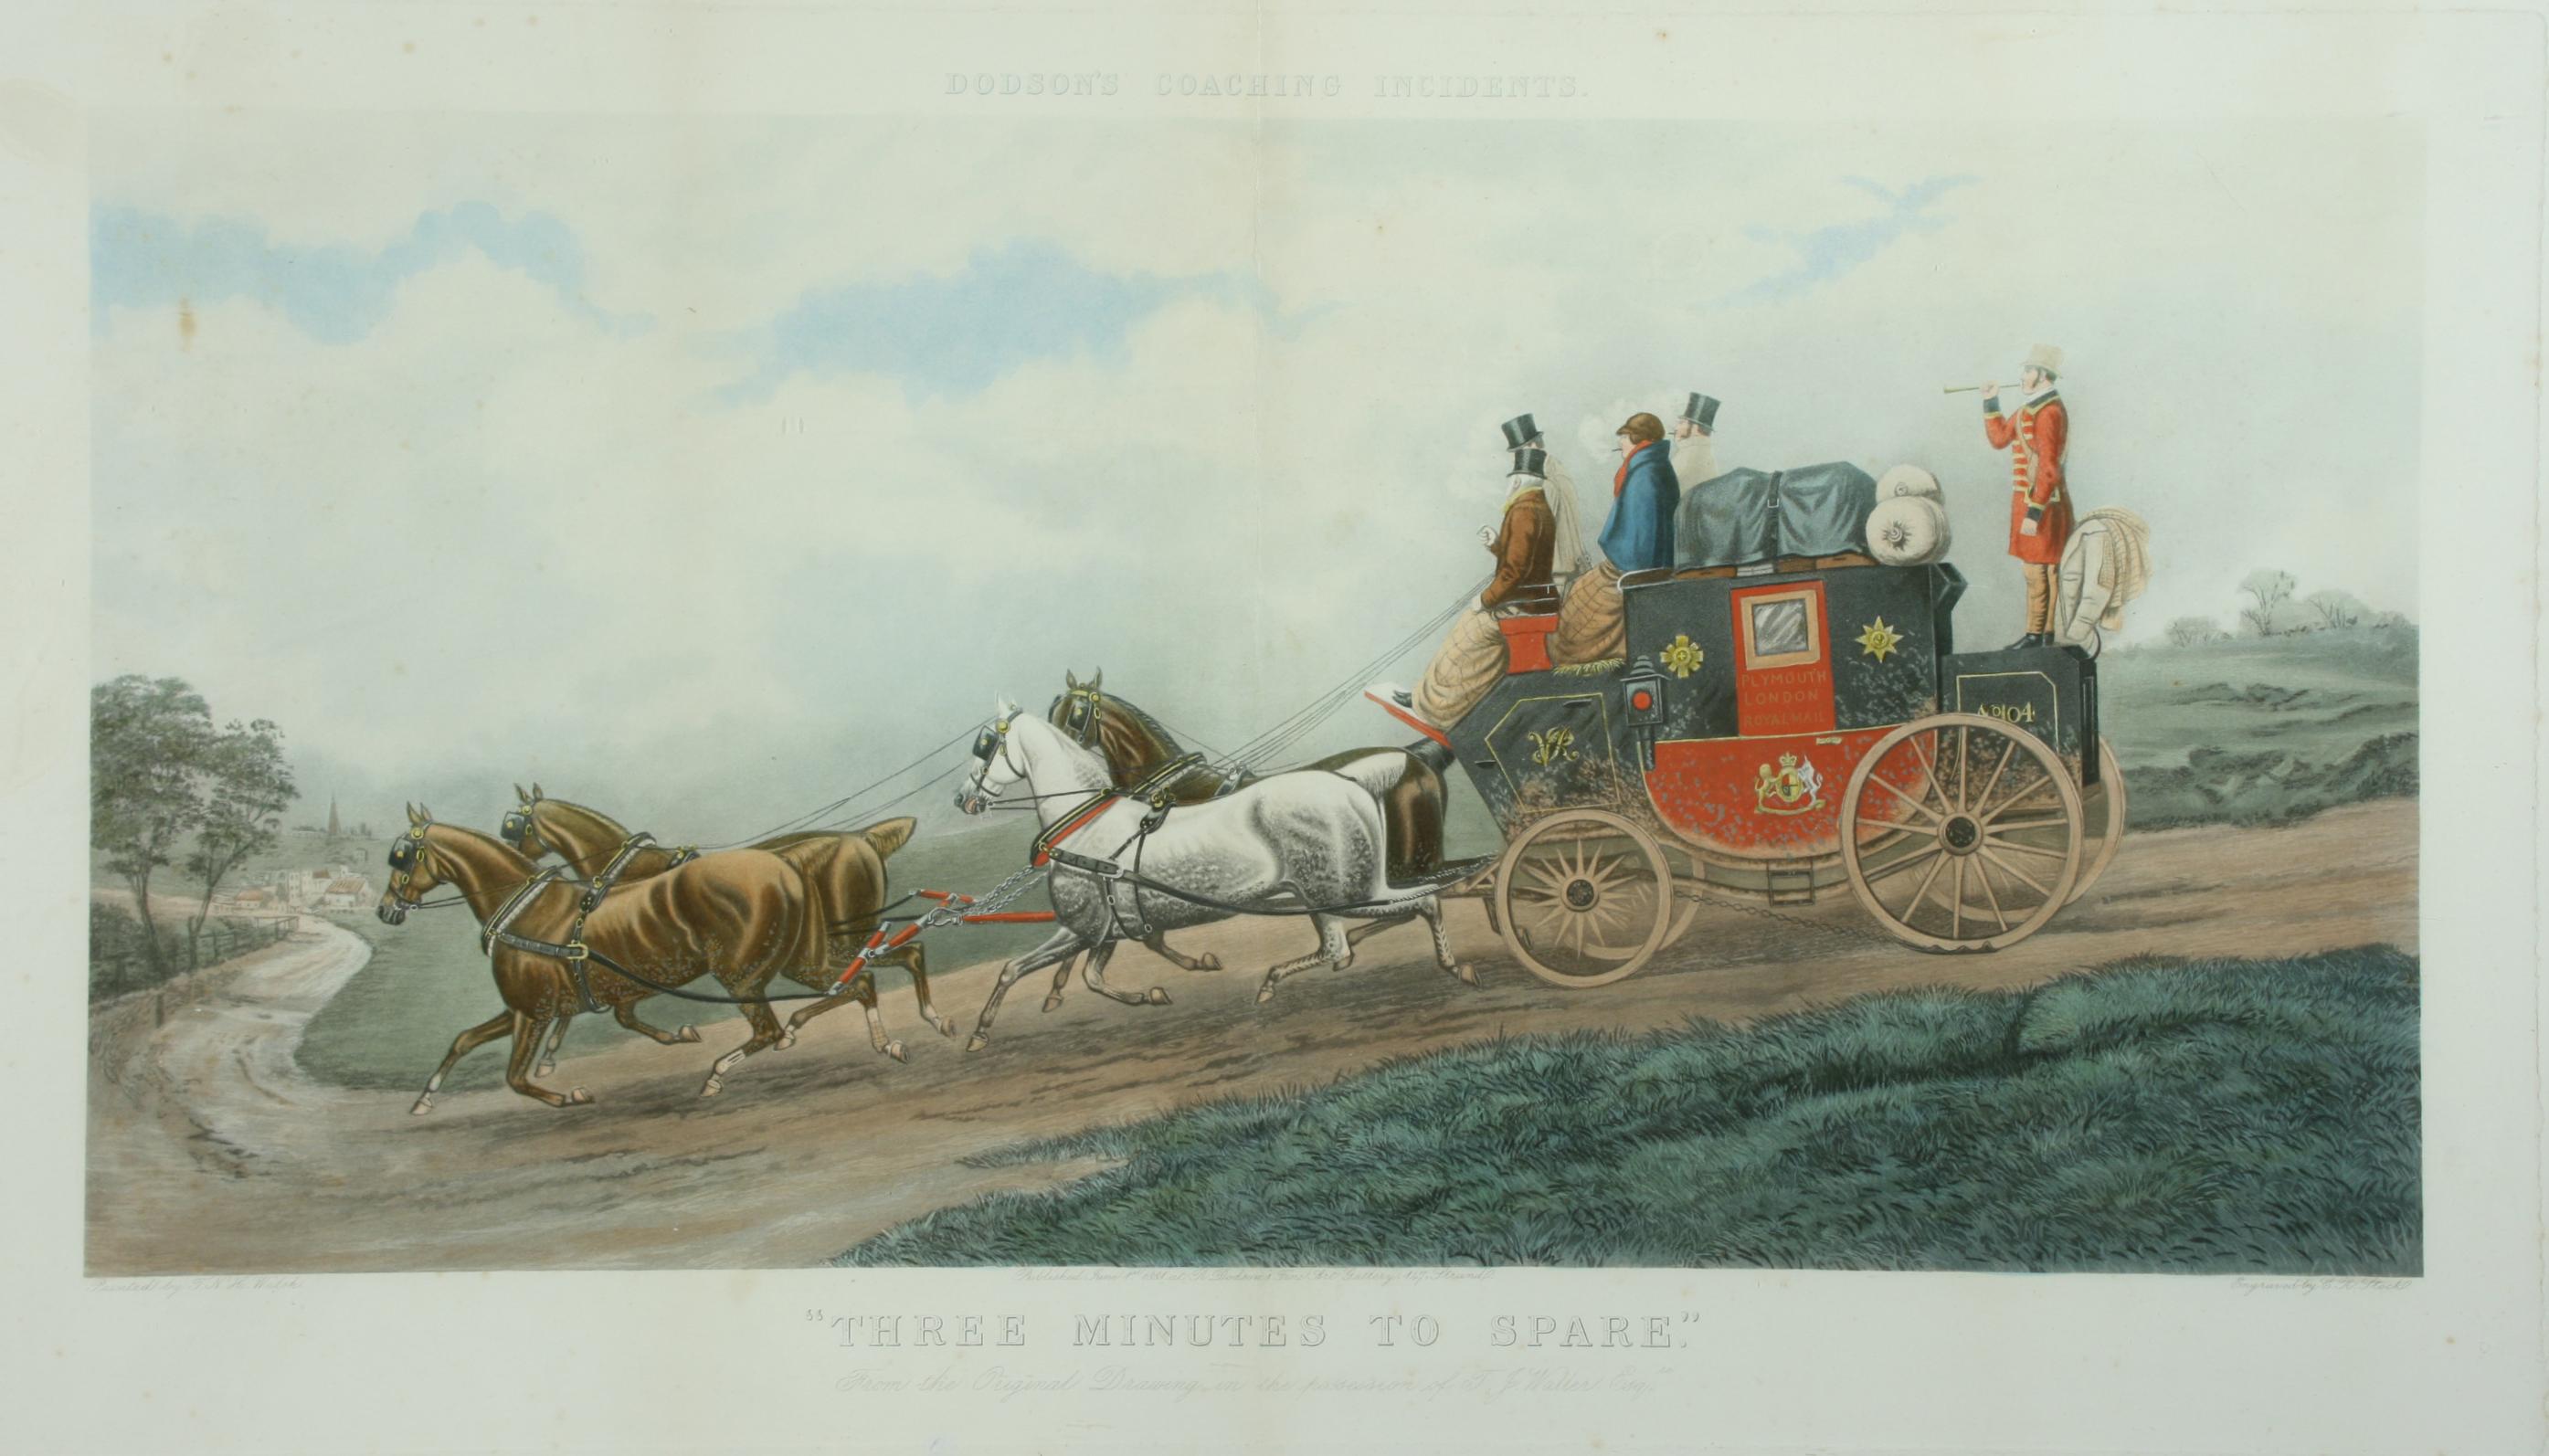 Antique coaching print 'Three Minutes to Spare', T. N. H. Walsh.
A good large colored coaching print 'Dodson's Coaching incidents', 'Three Minutes to Spare' after the painting by T.N.H.Walsh, engraved by C.R.Stock. The picture is framed in a blonde